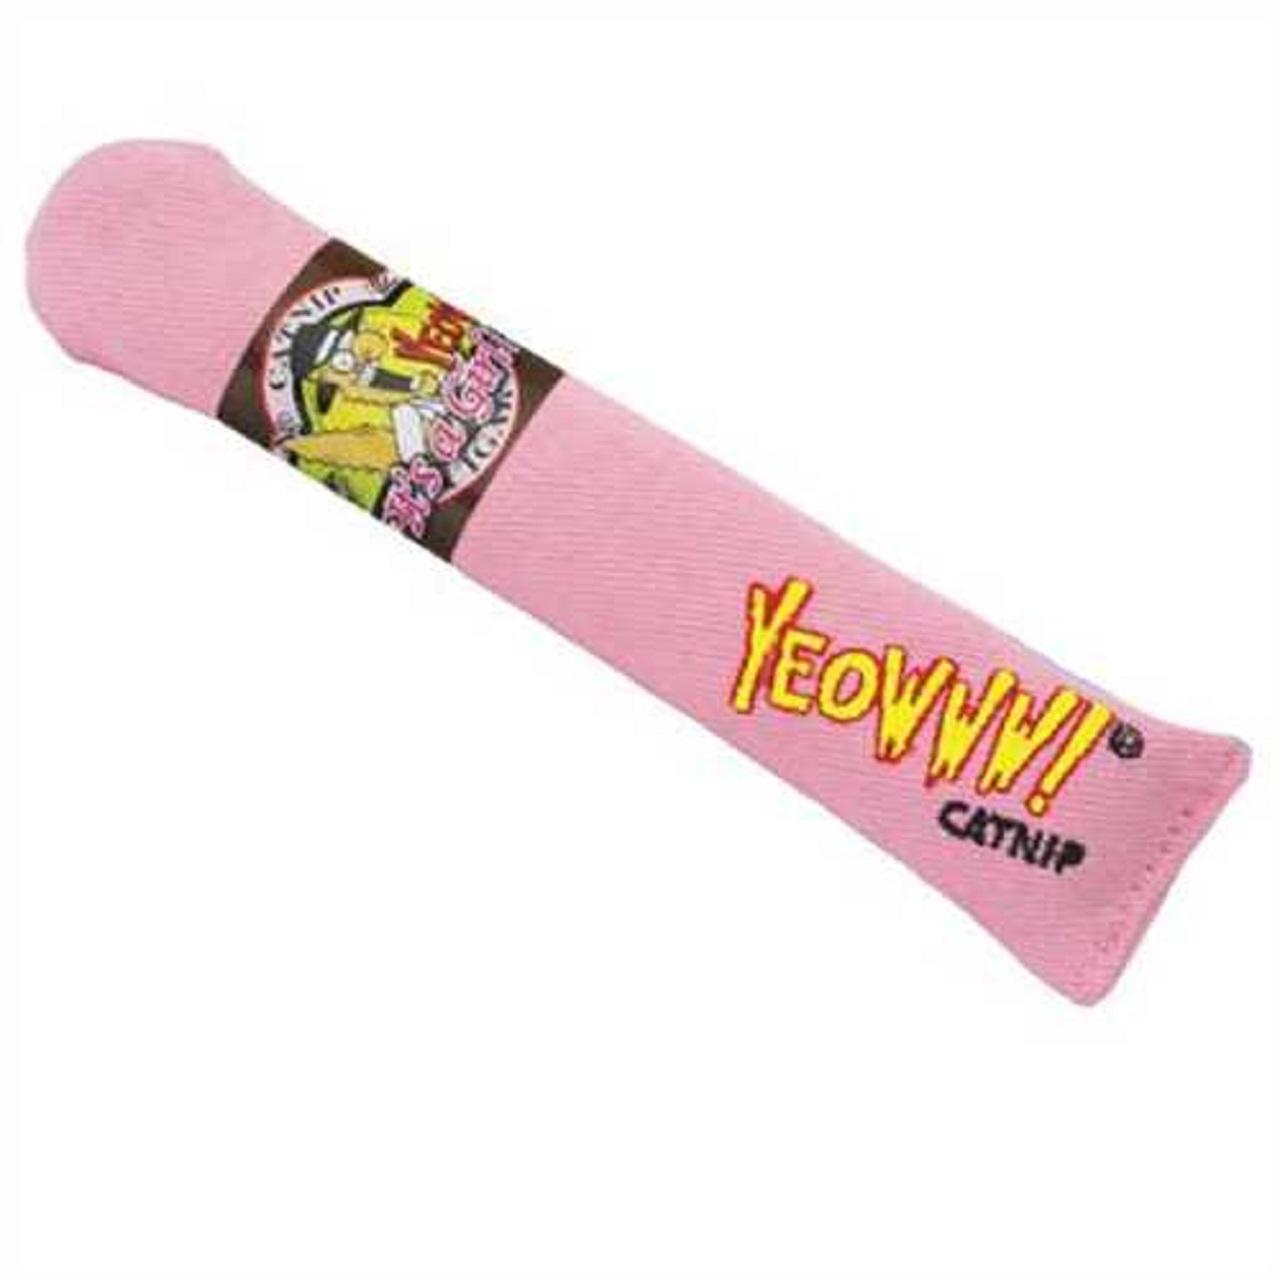 An image of Yeowww Pink Cigar